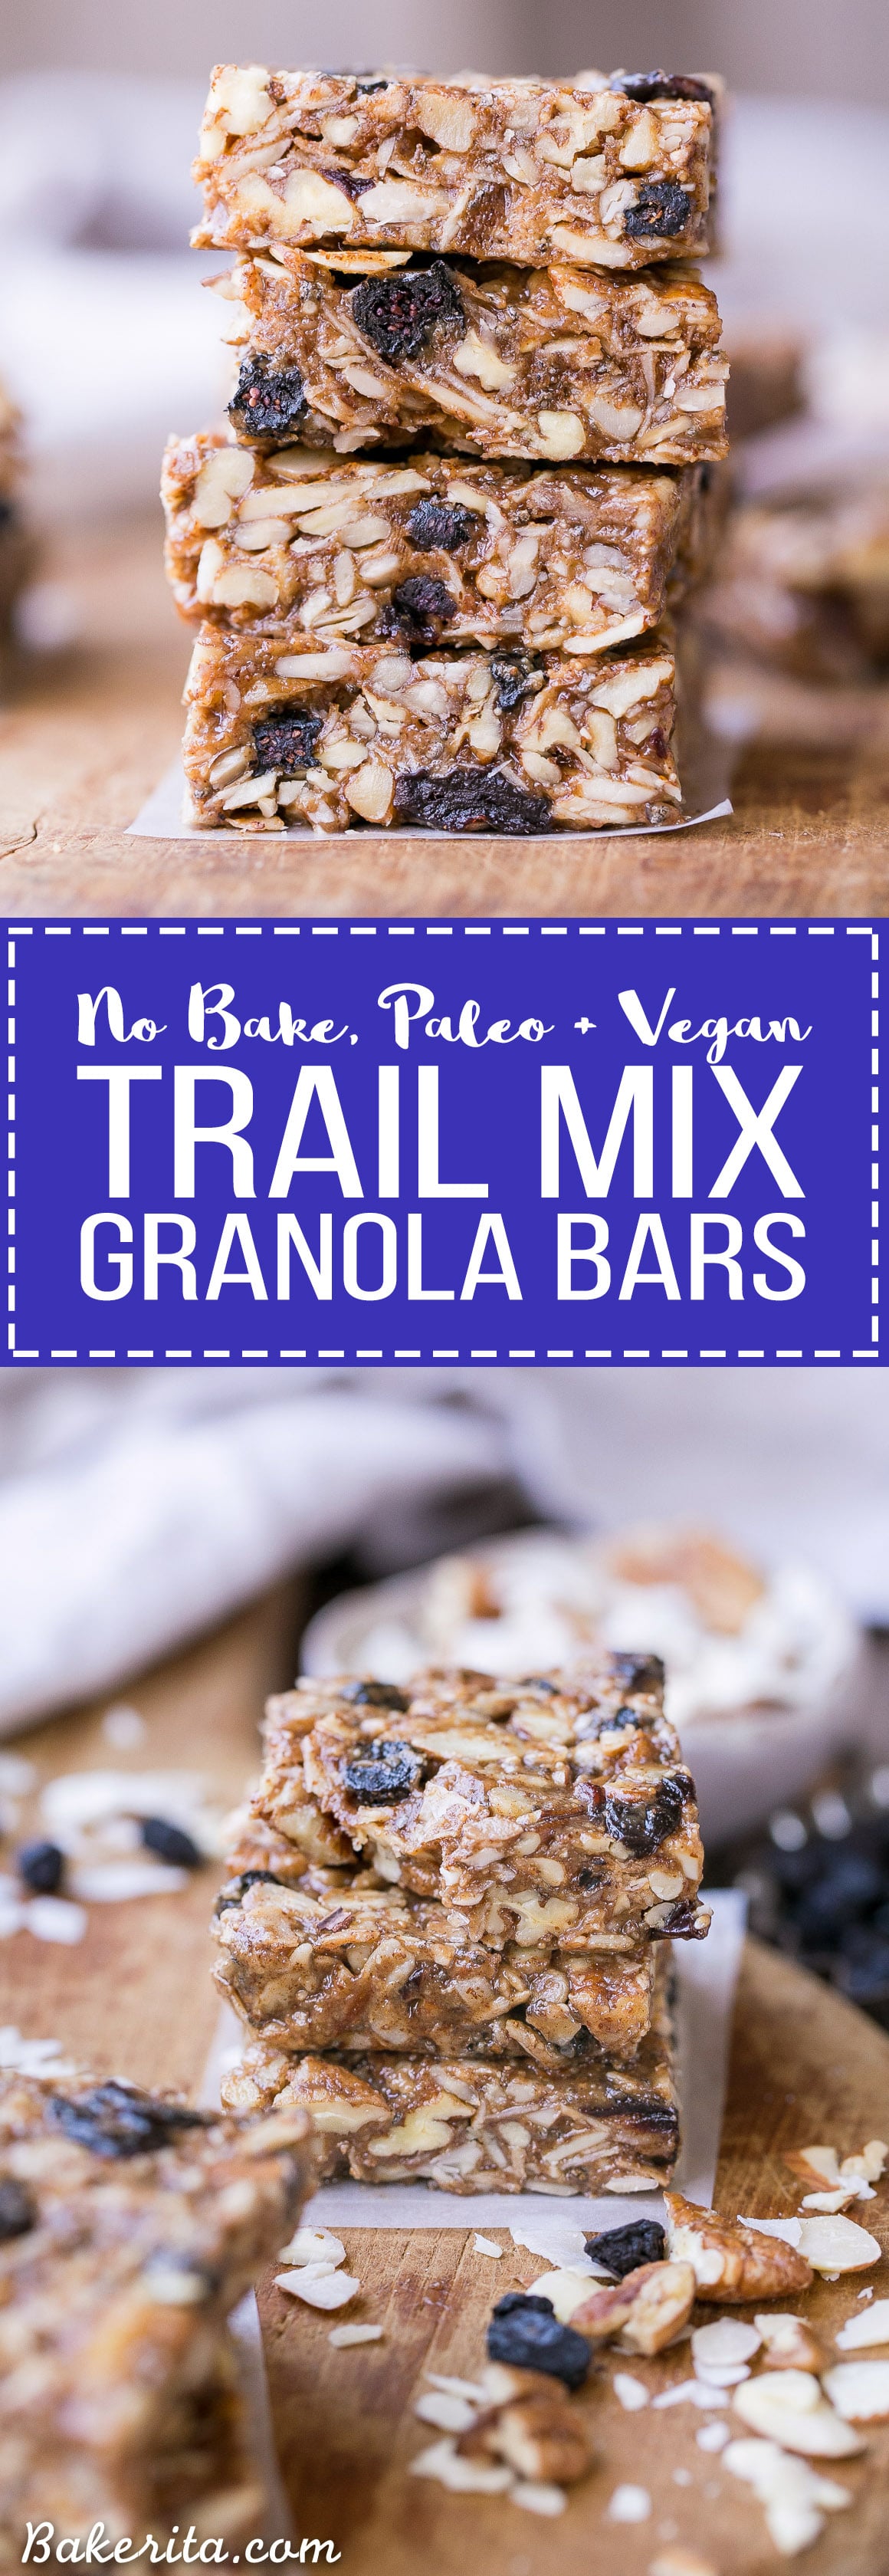 These No-Bake Trail Mix Granola Bars are loaded with nuts, coconut, and dried fruit for a filling and delicious snack that will fill you up and satisfy your tastebuds! These Paleo + vegan granola bars are the perfect thing to keep on hand for when hunger hits.